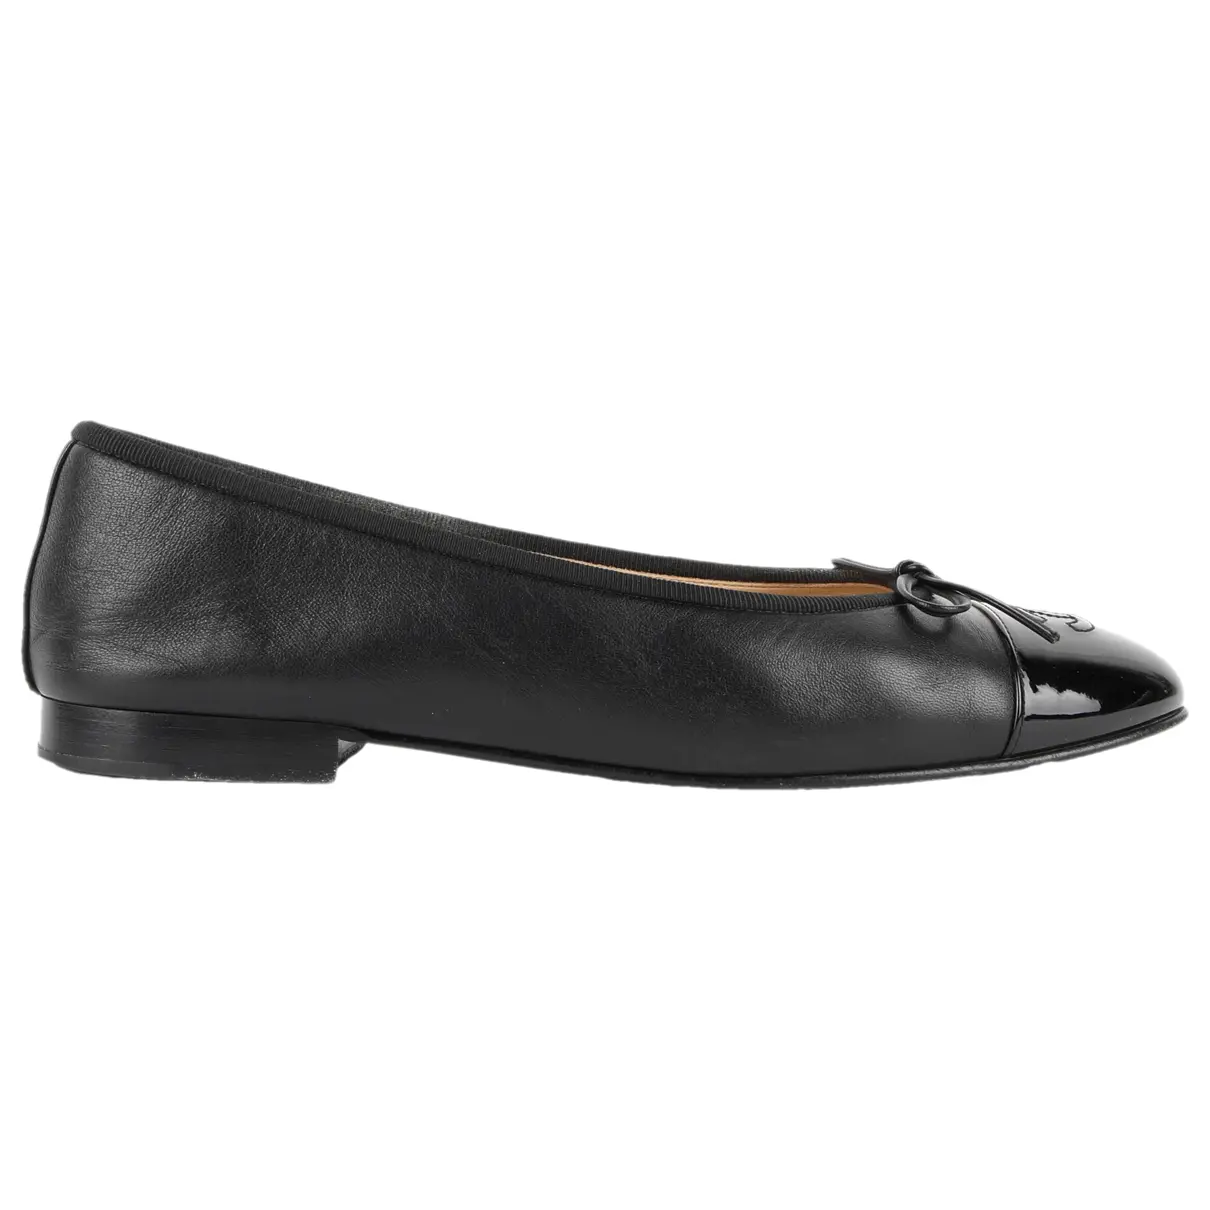 Cambon leather ballet flats